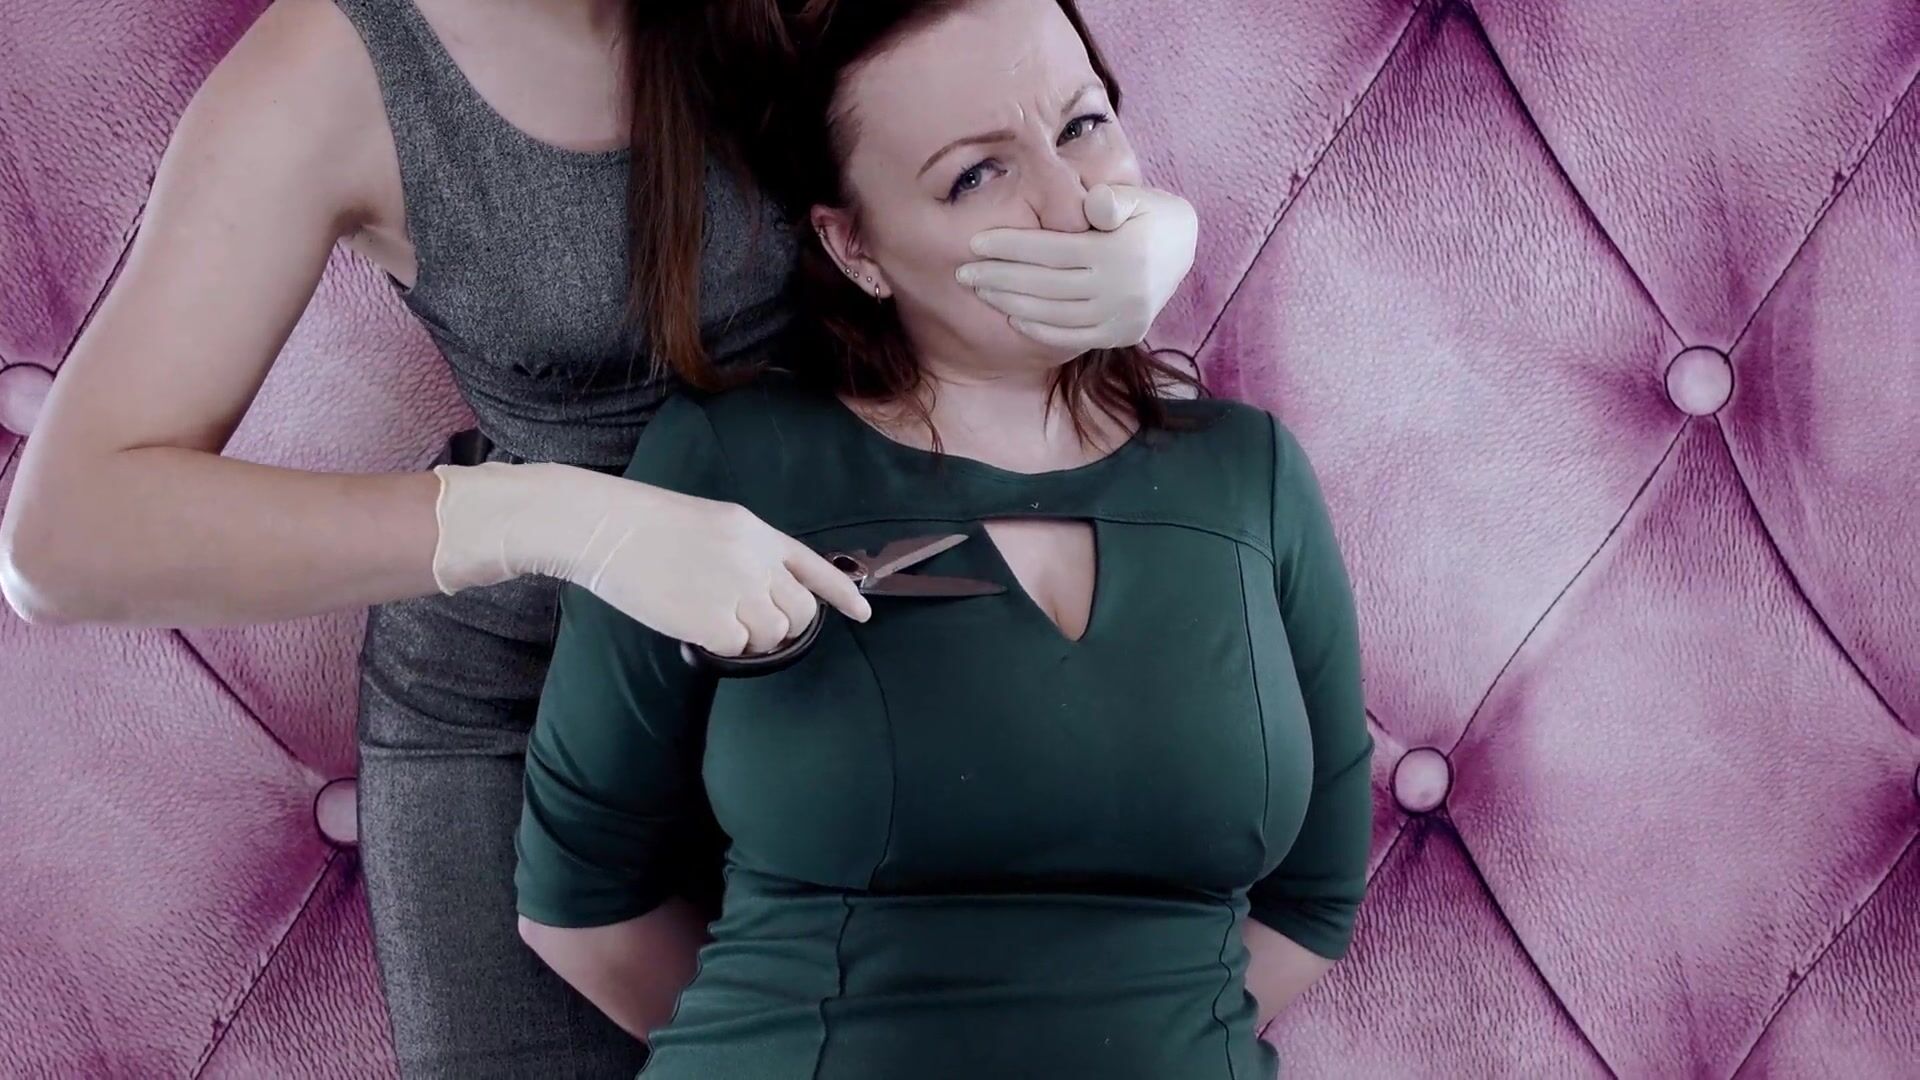 Latex Lesbian Oil - Lesbian roleplay: cut dress fetish and medical latex gloves (Arya Grander  and Mistress Priest) watch online